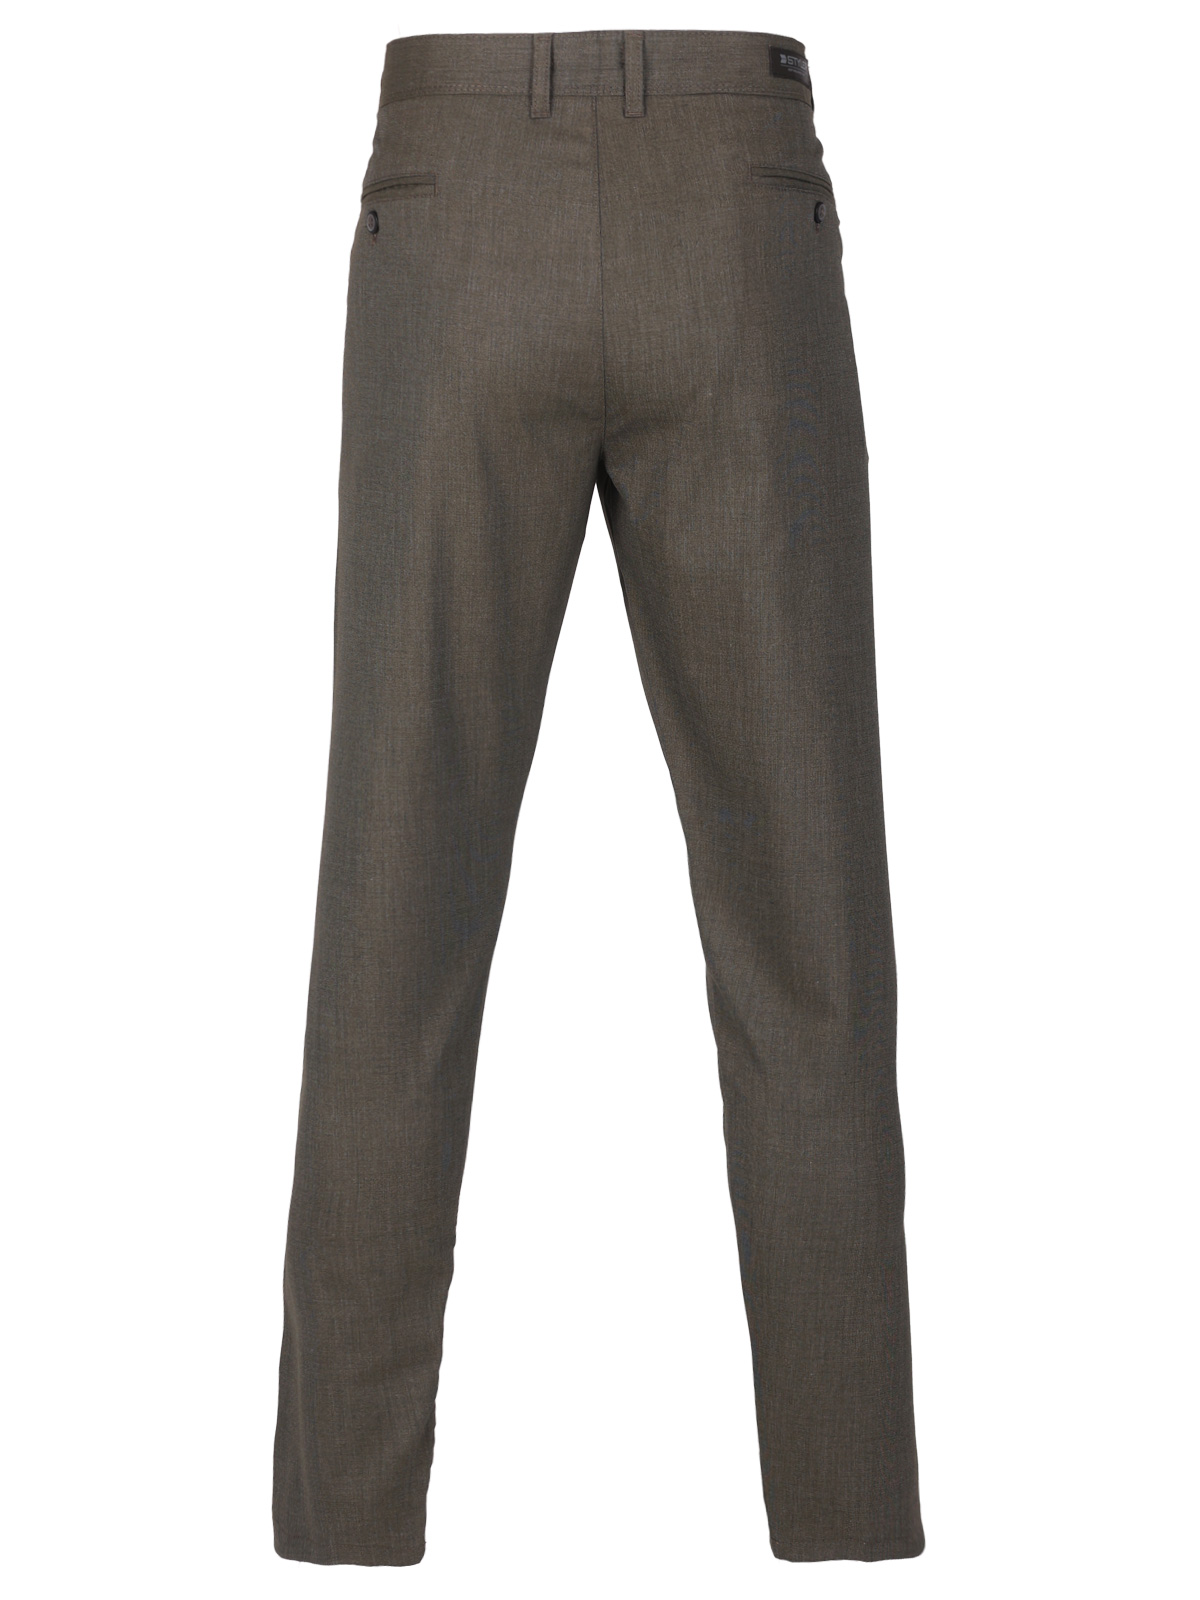 Fitted trousers green melange - 60311 € 66.37 img2